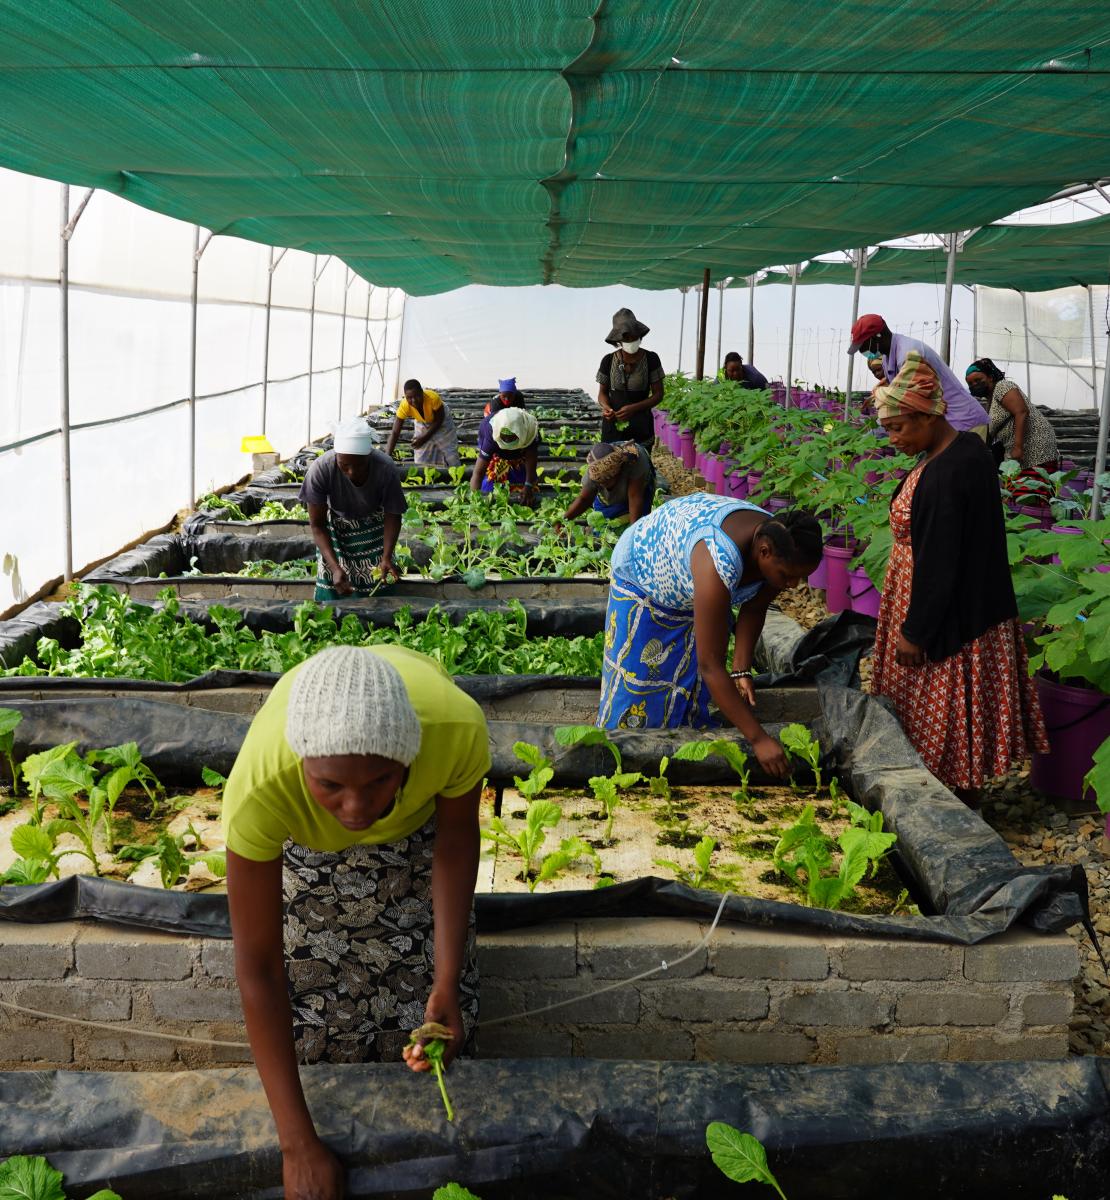 Women in a greenhouse plant and inspect different plant rows and varieties. They wear colorful skirts and prints.